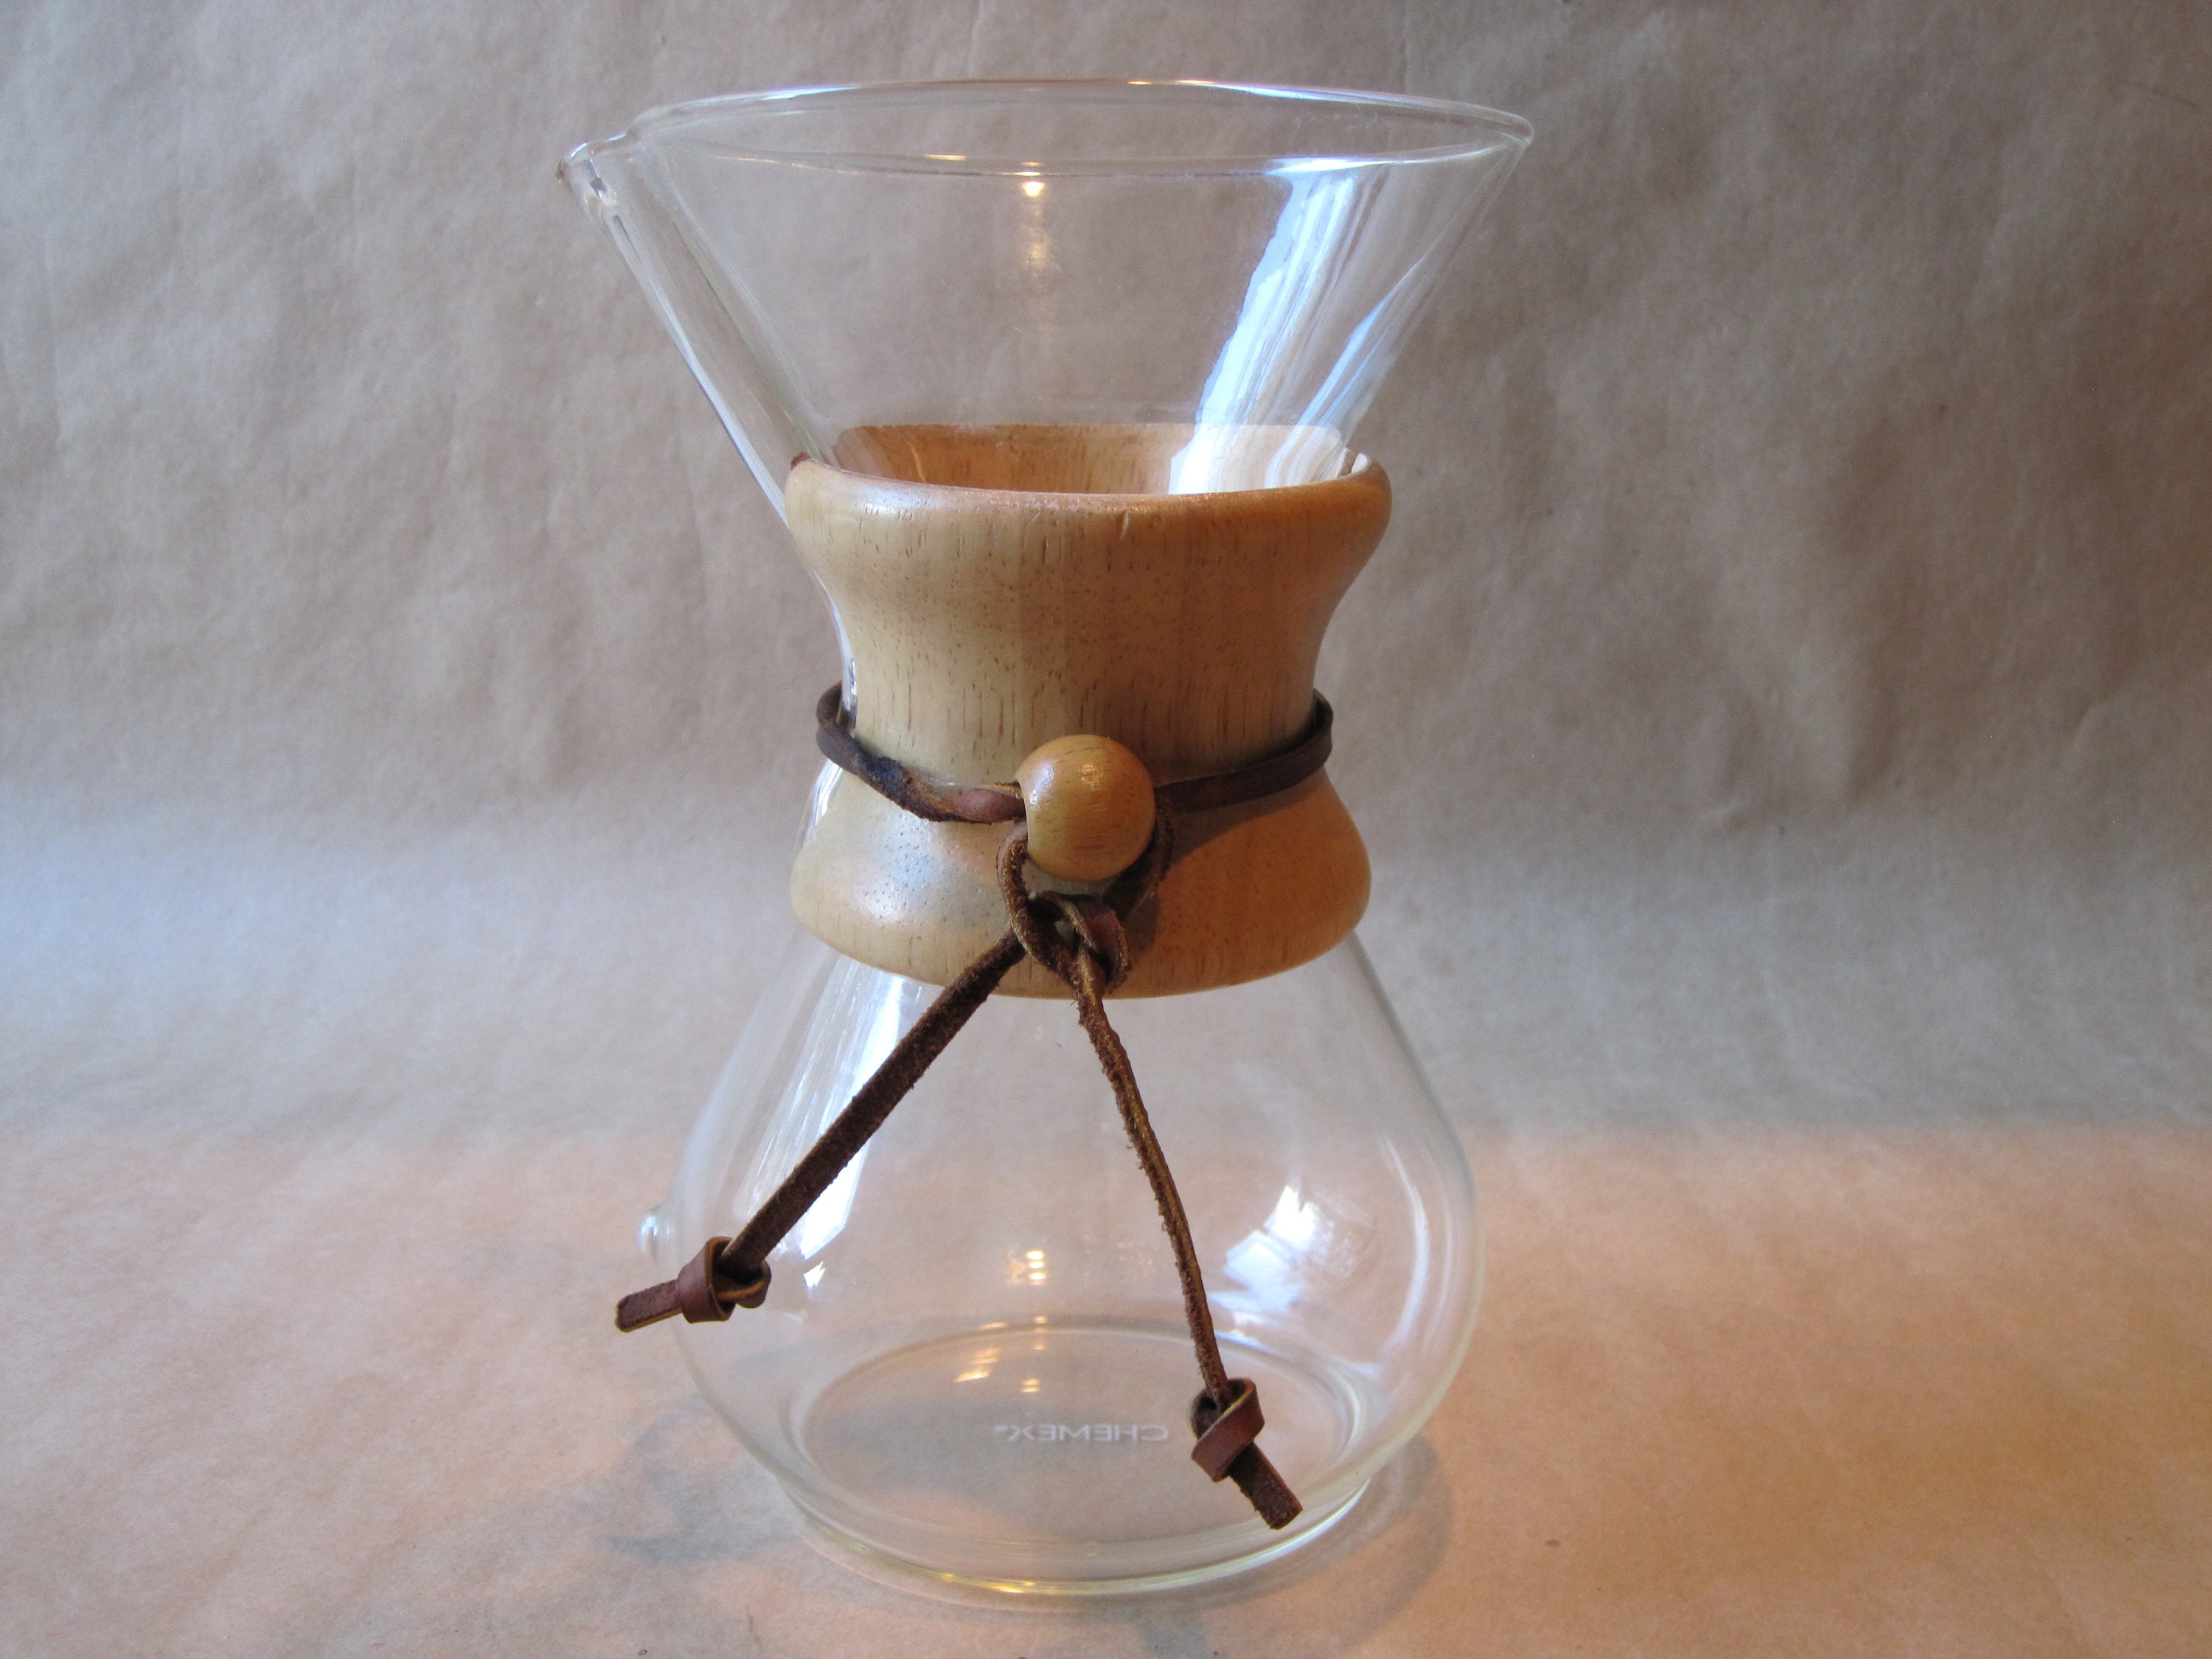 Chemex 6-Cup Glass Pour-Over Coffee Maker with Natural Wood Collar